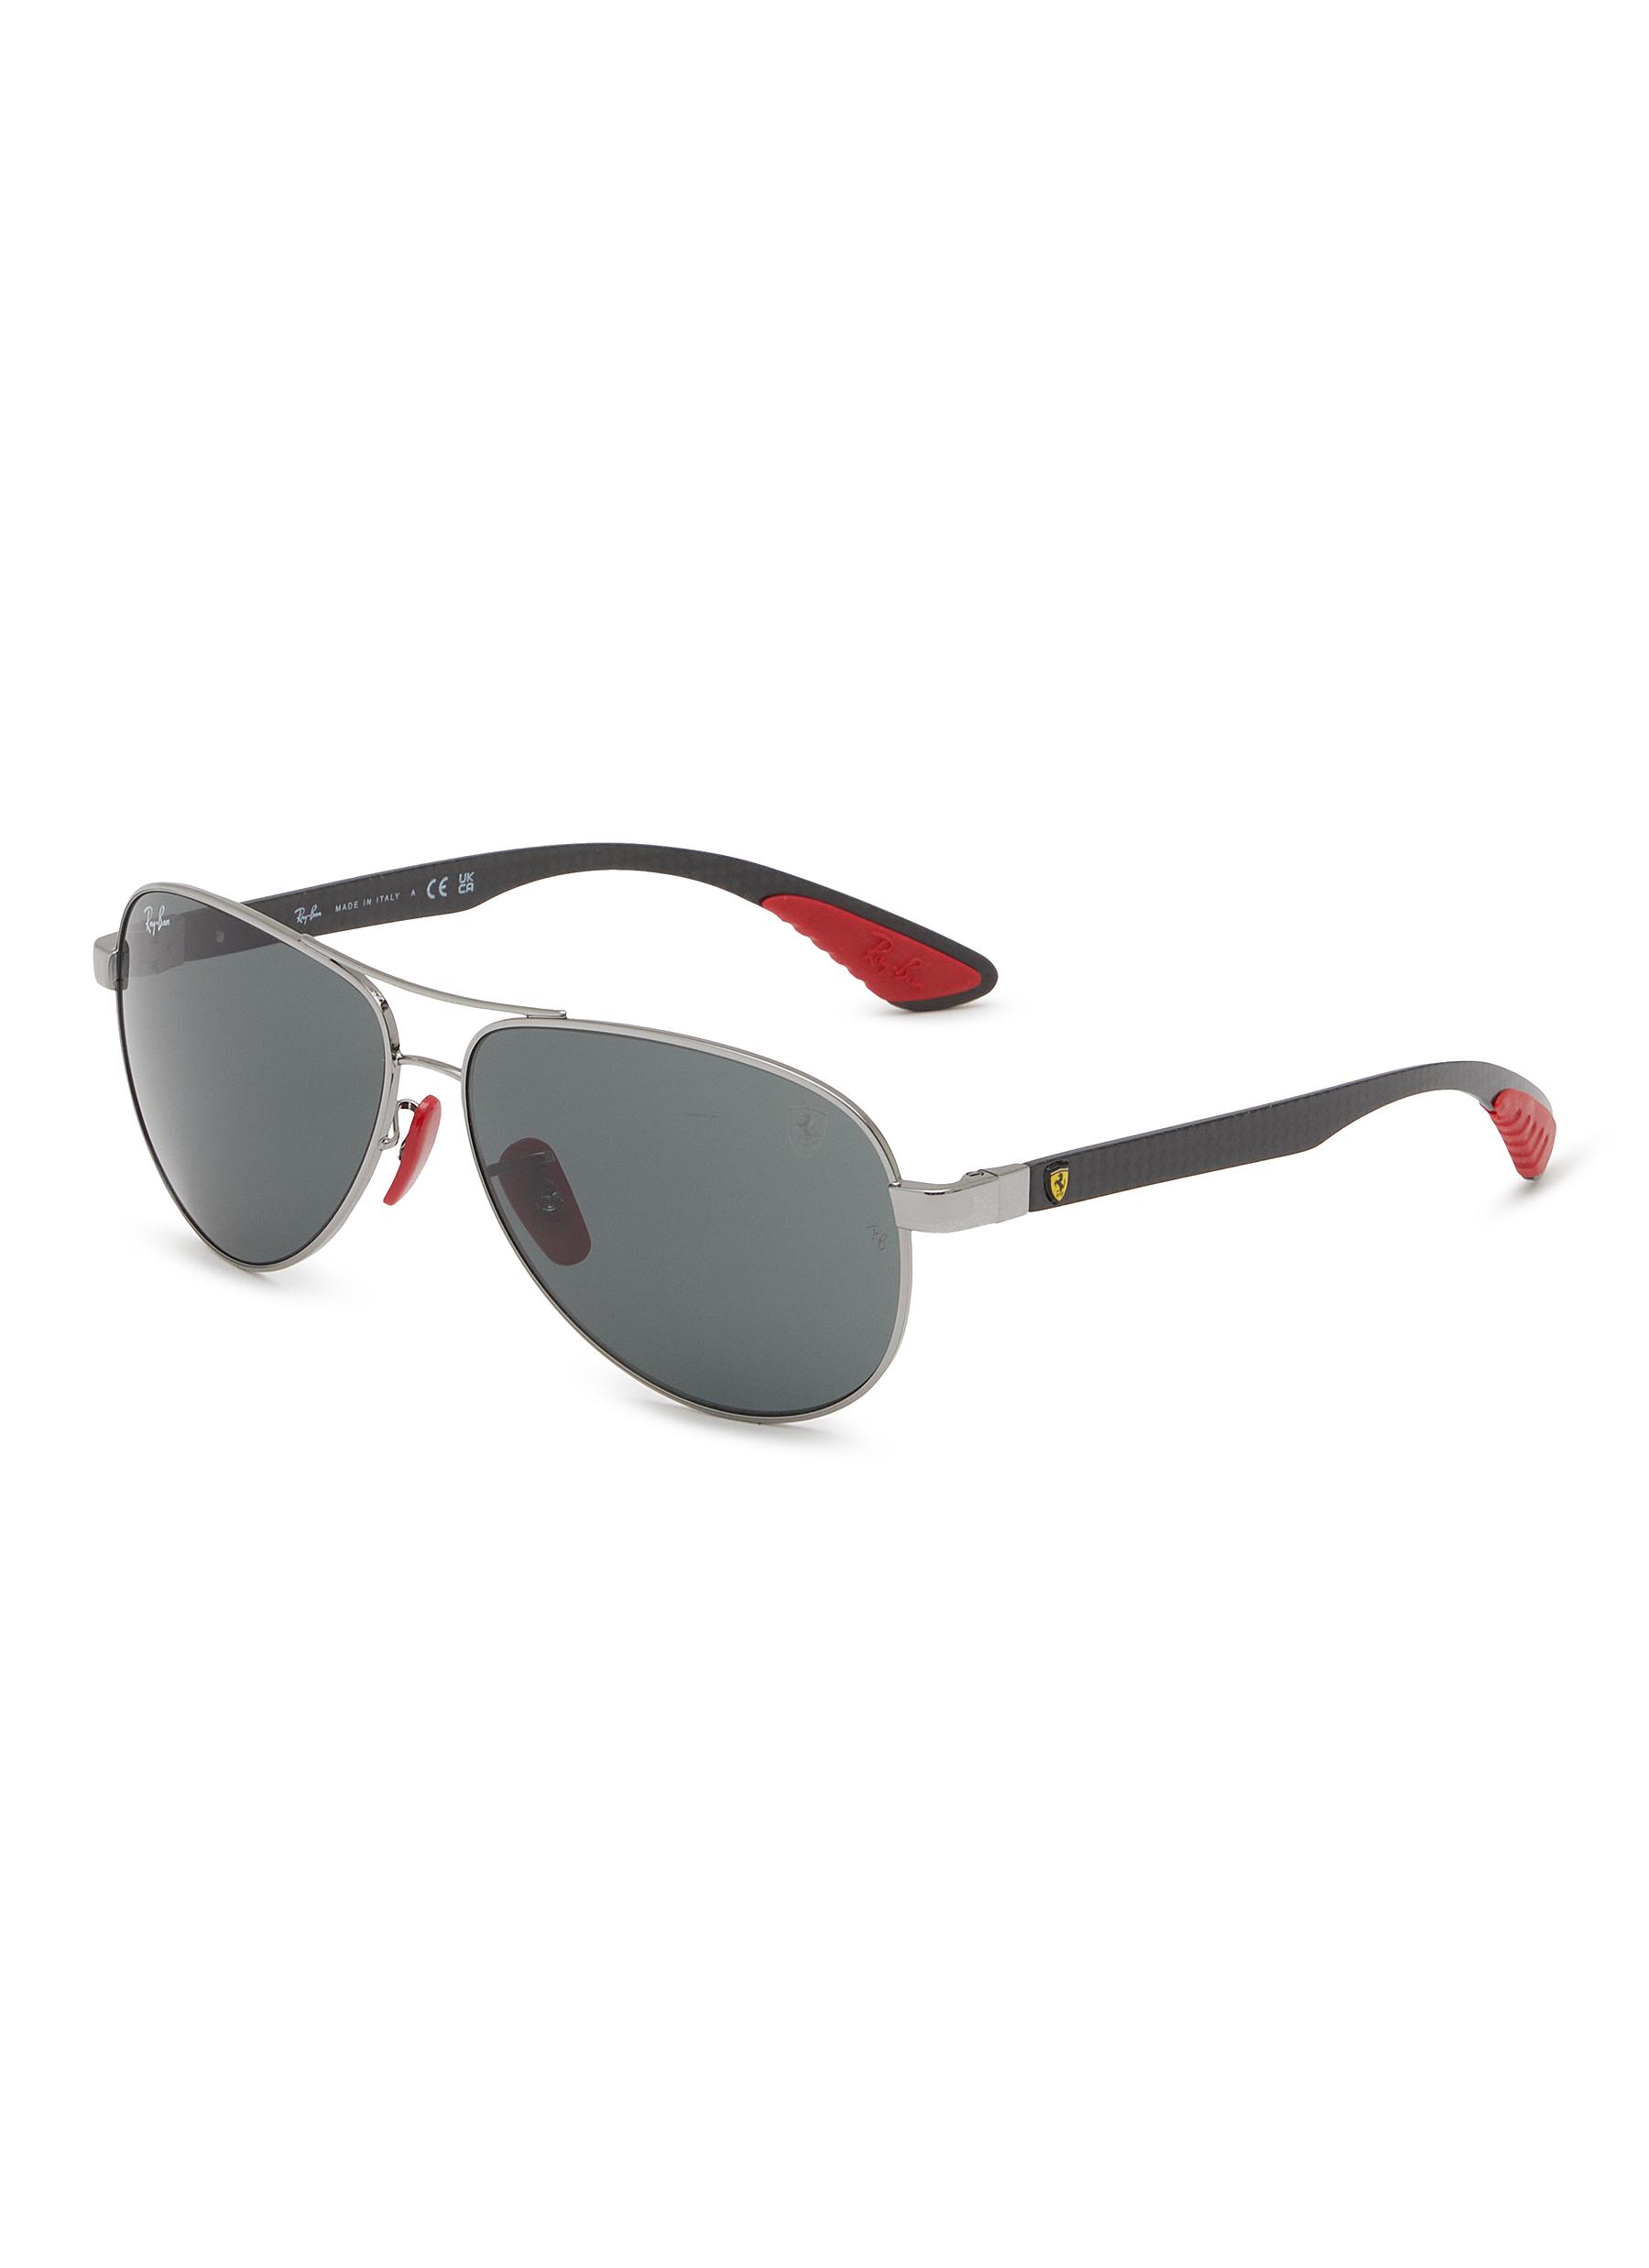 Amazon.com: Ray-Ban: Best Sellers